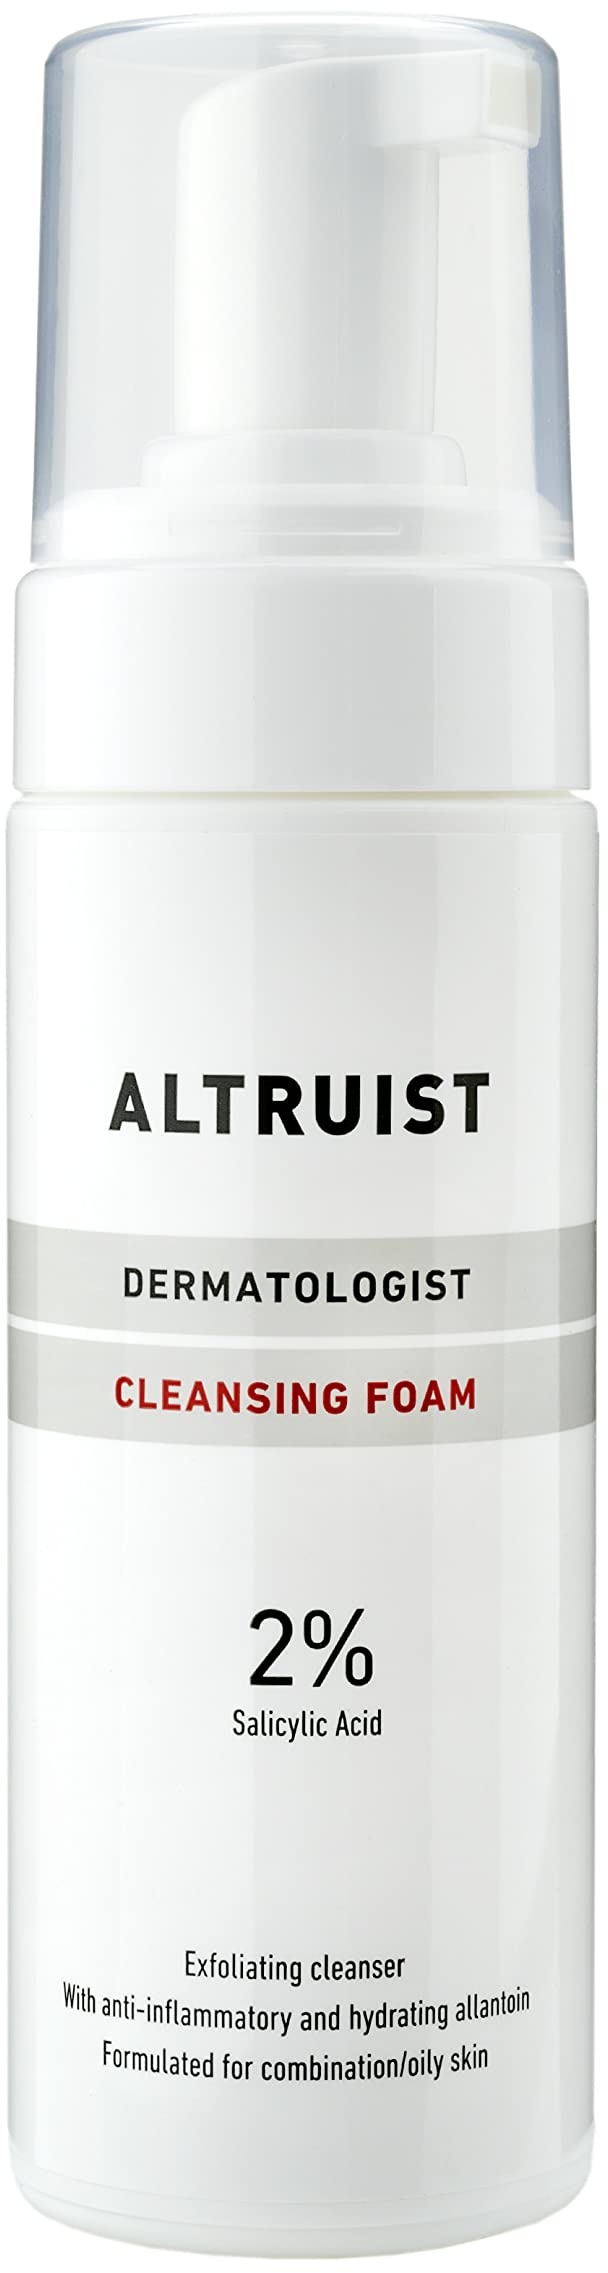 Altruist Dermatologist Cleansing Foam, 2% Salicyclic Acid - Exfoliating cleanser with anti-inflammatory and hydrating allantoin, formulated for combination/oily skin